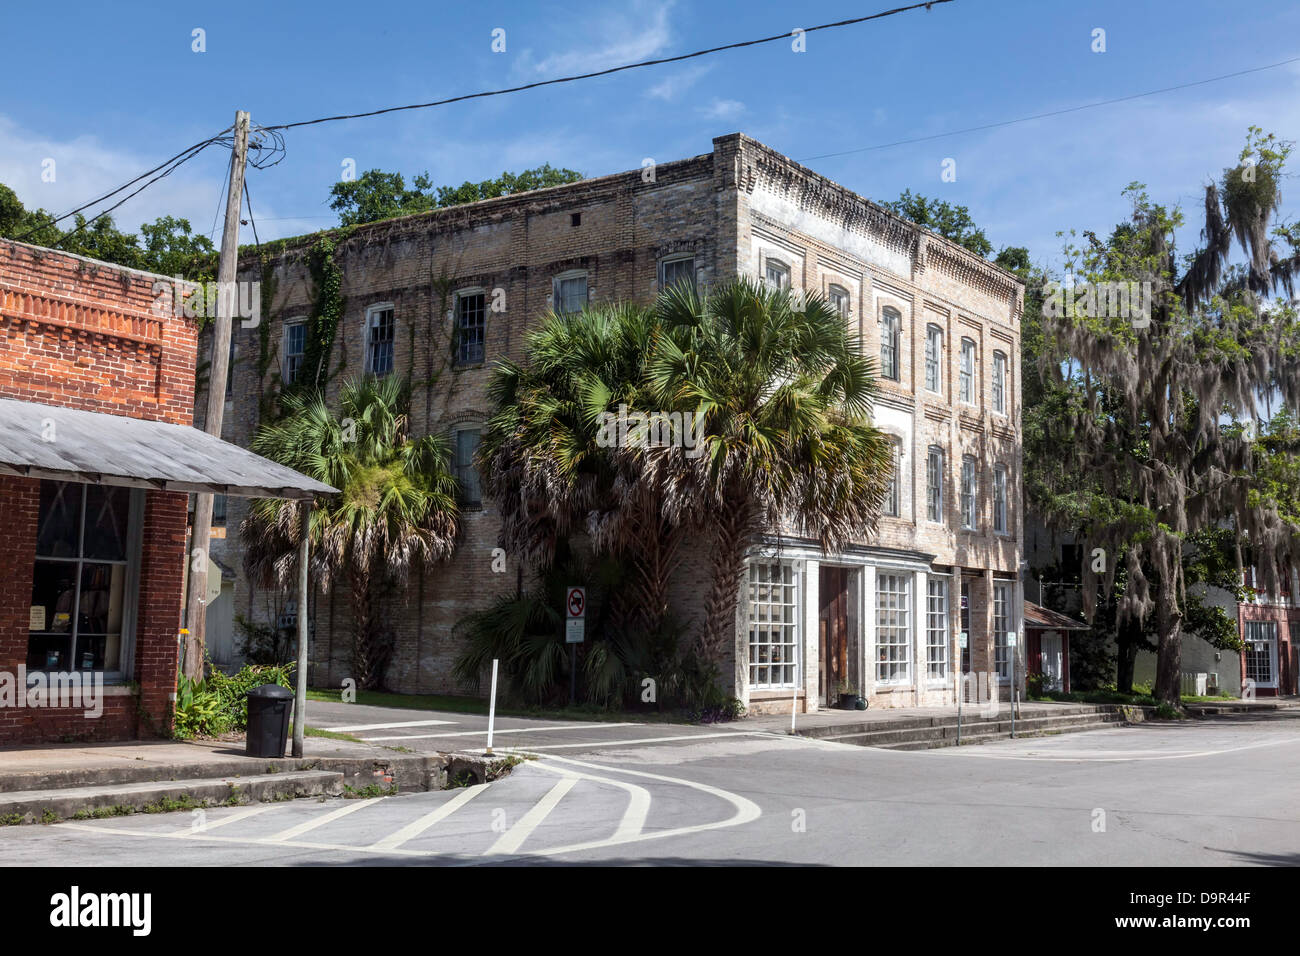 Old antique shop in a three-story brick commercial building in the historic district of Micanopy, Florida. Stock Photo